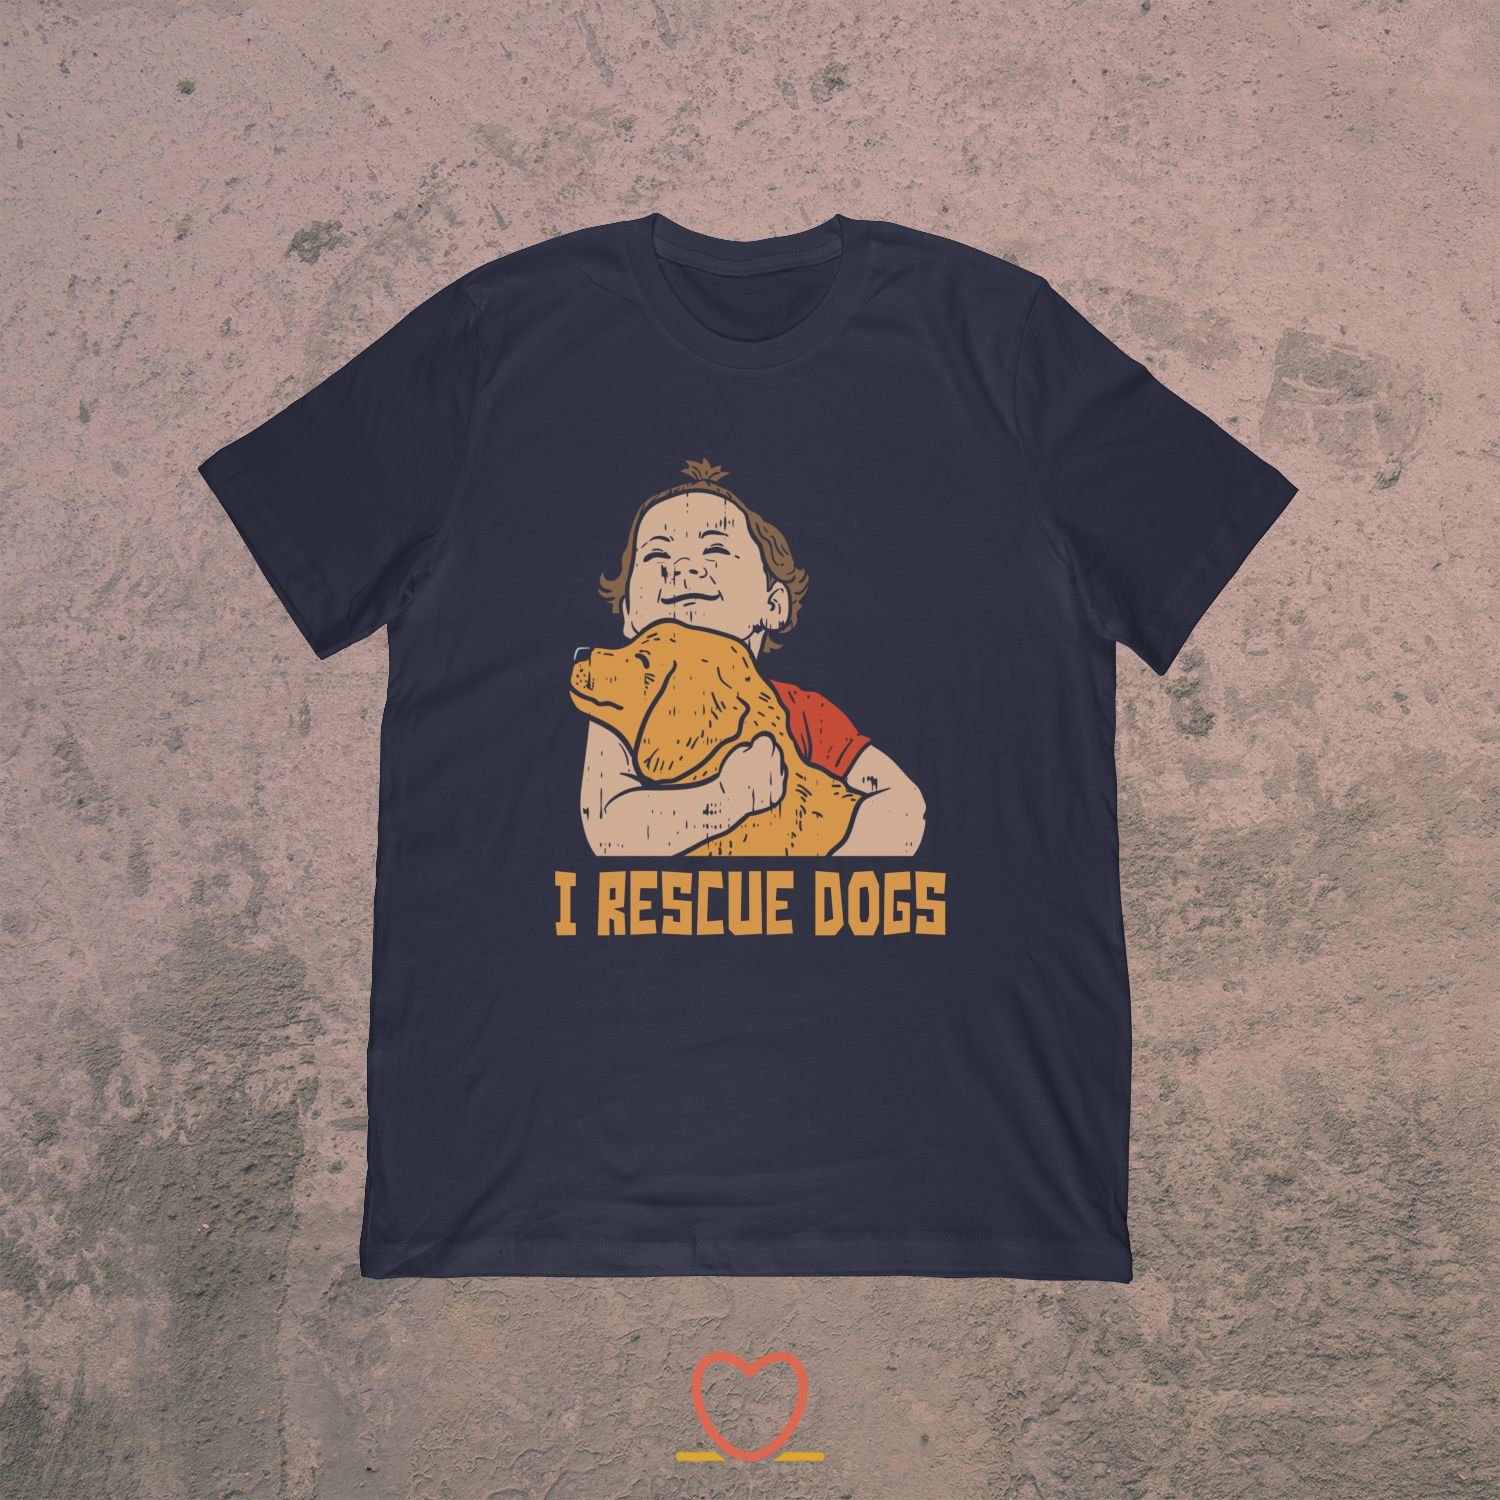 I Rescue Dogs – Animal Rescue Tee